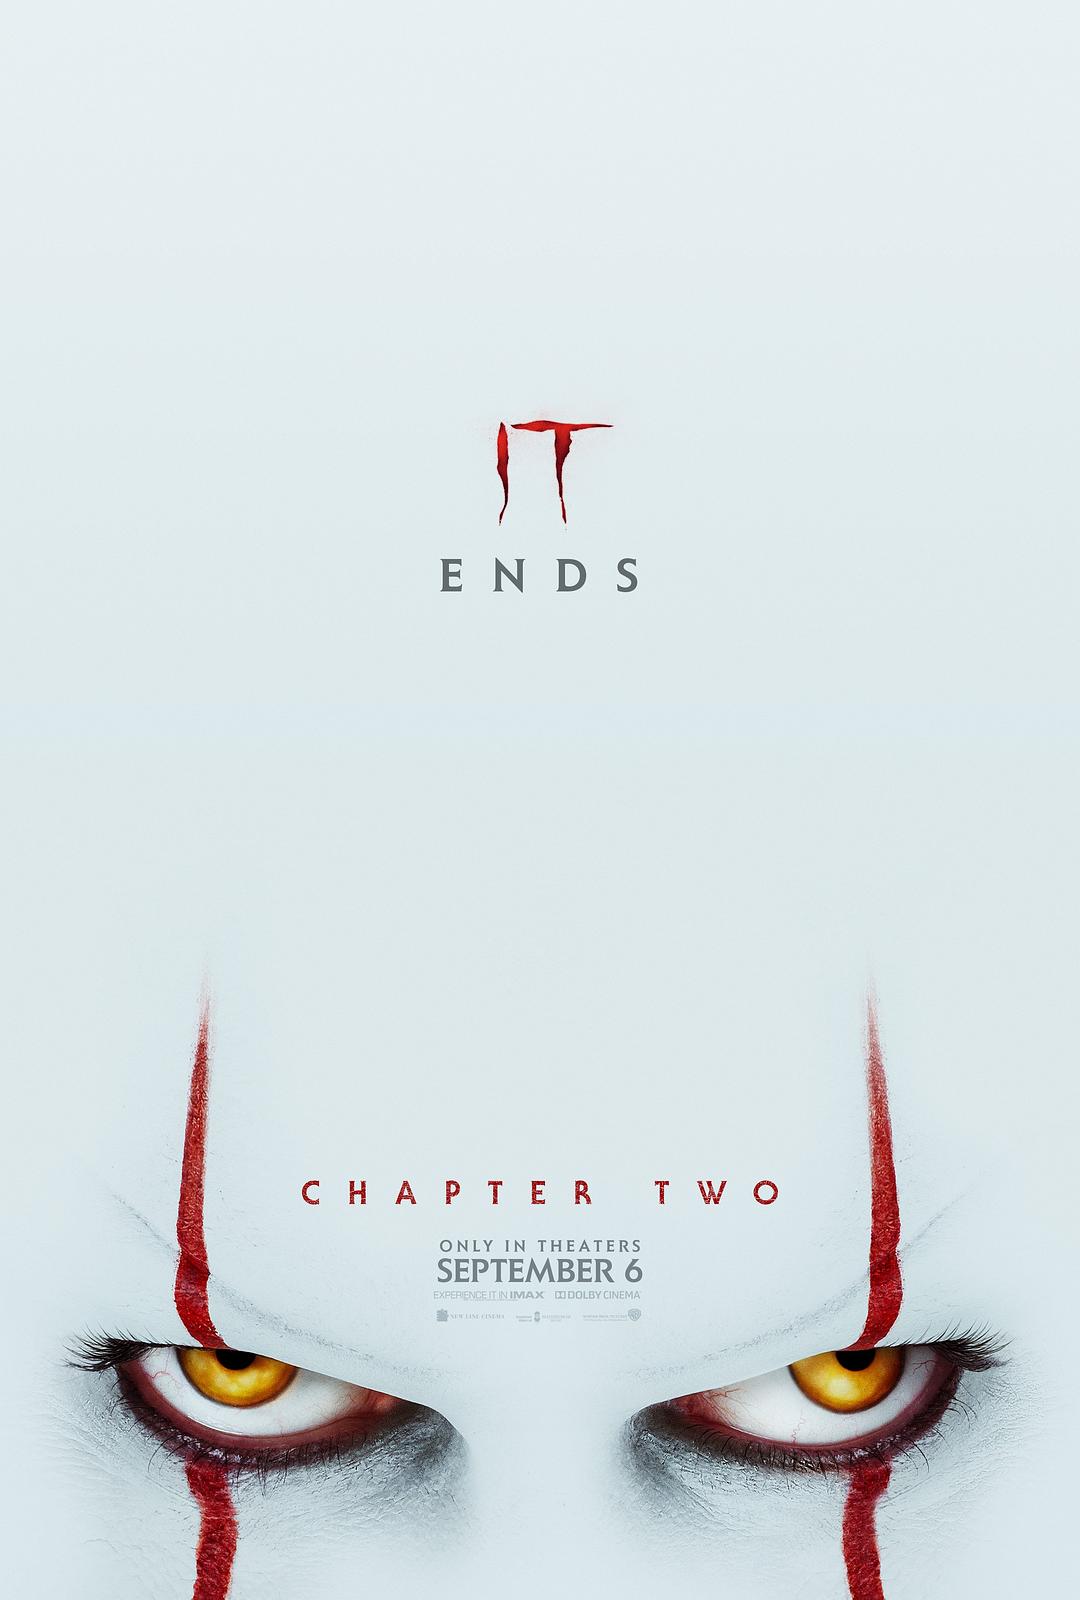 Сػ2 It.Chapter.Two.2019.1080p.BluRay.REMUX.AVC.DTS-HD.MA.TrueHD.7.1.Atmos-FGT-1.png